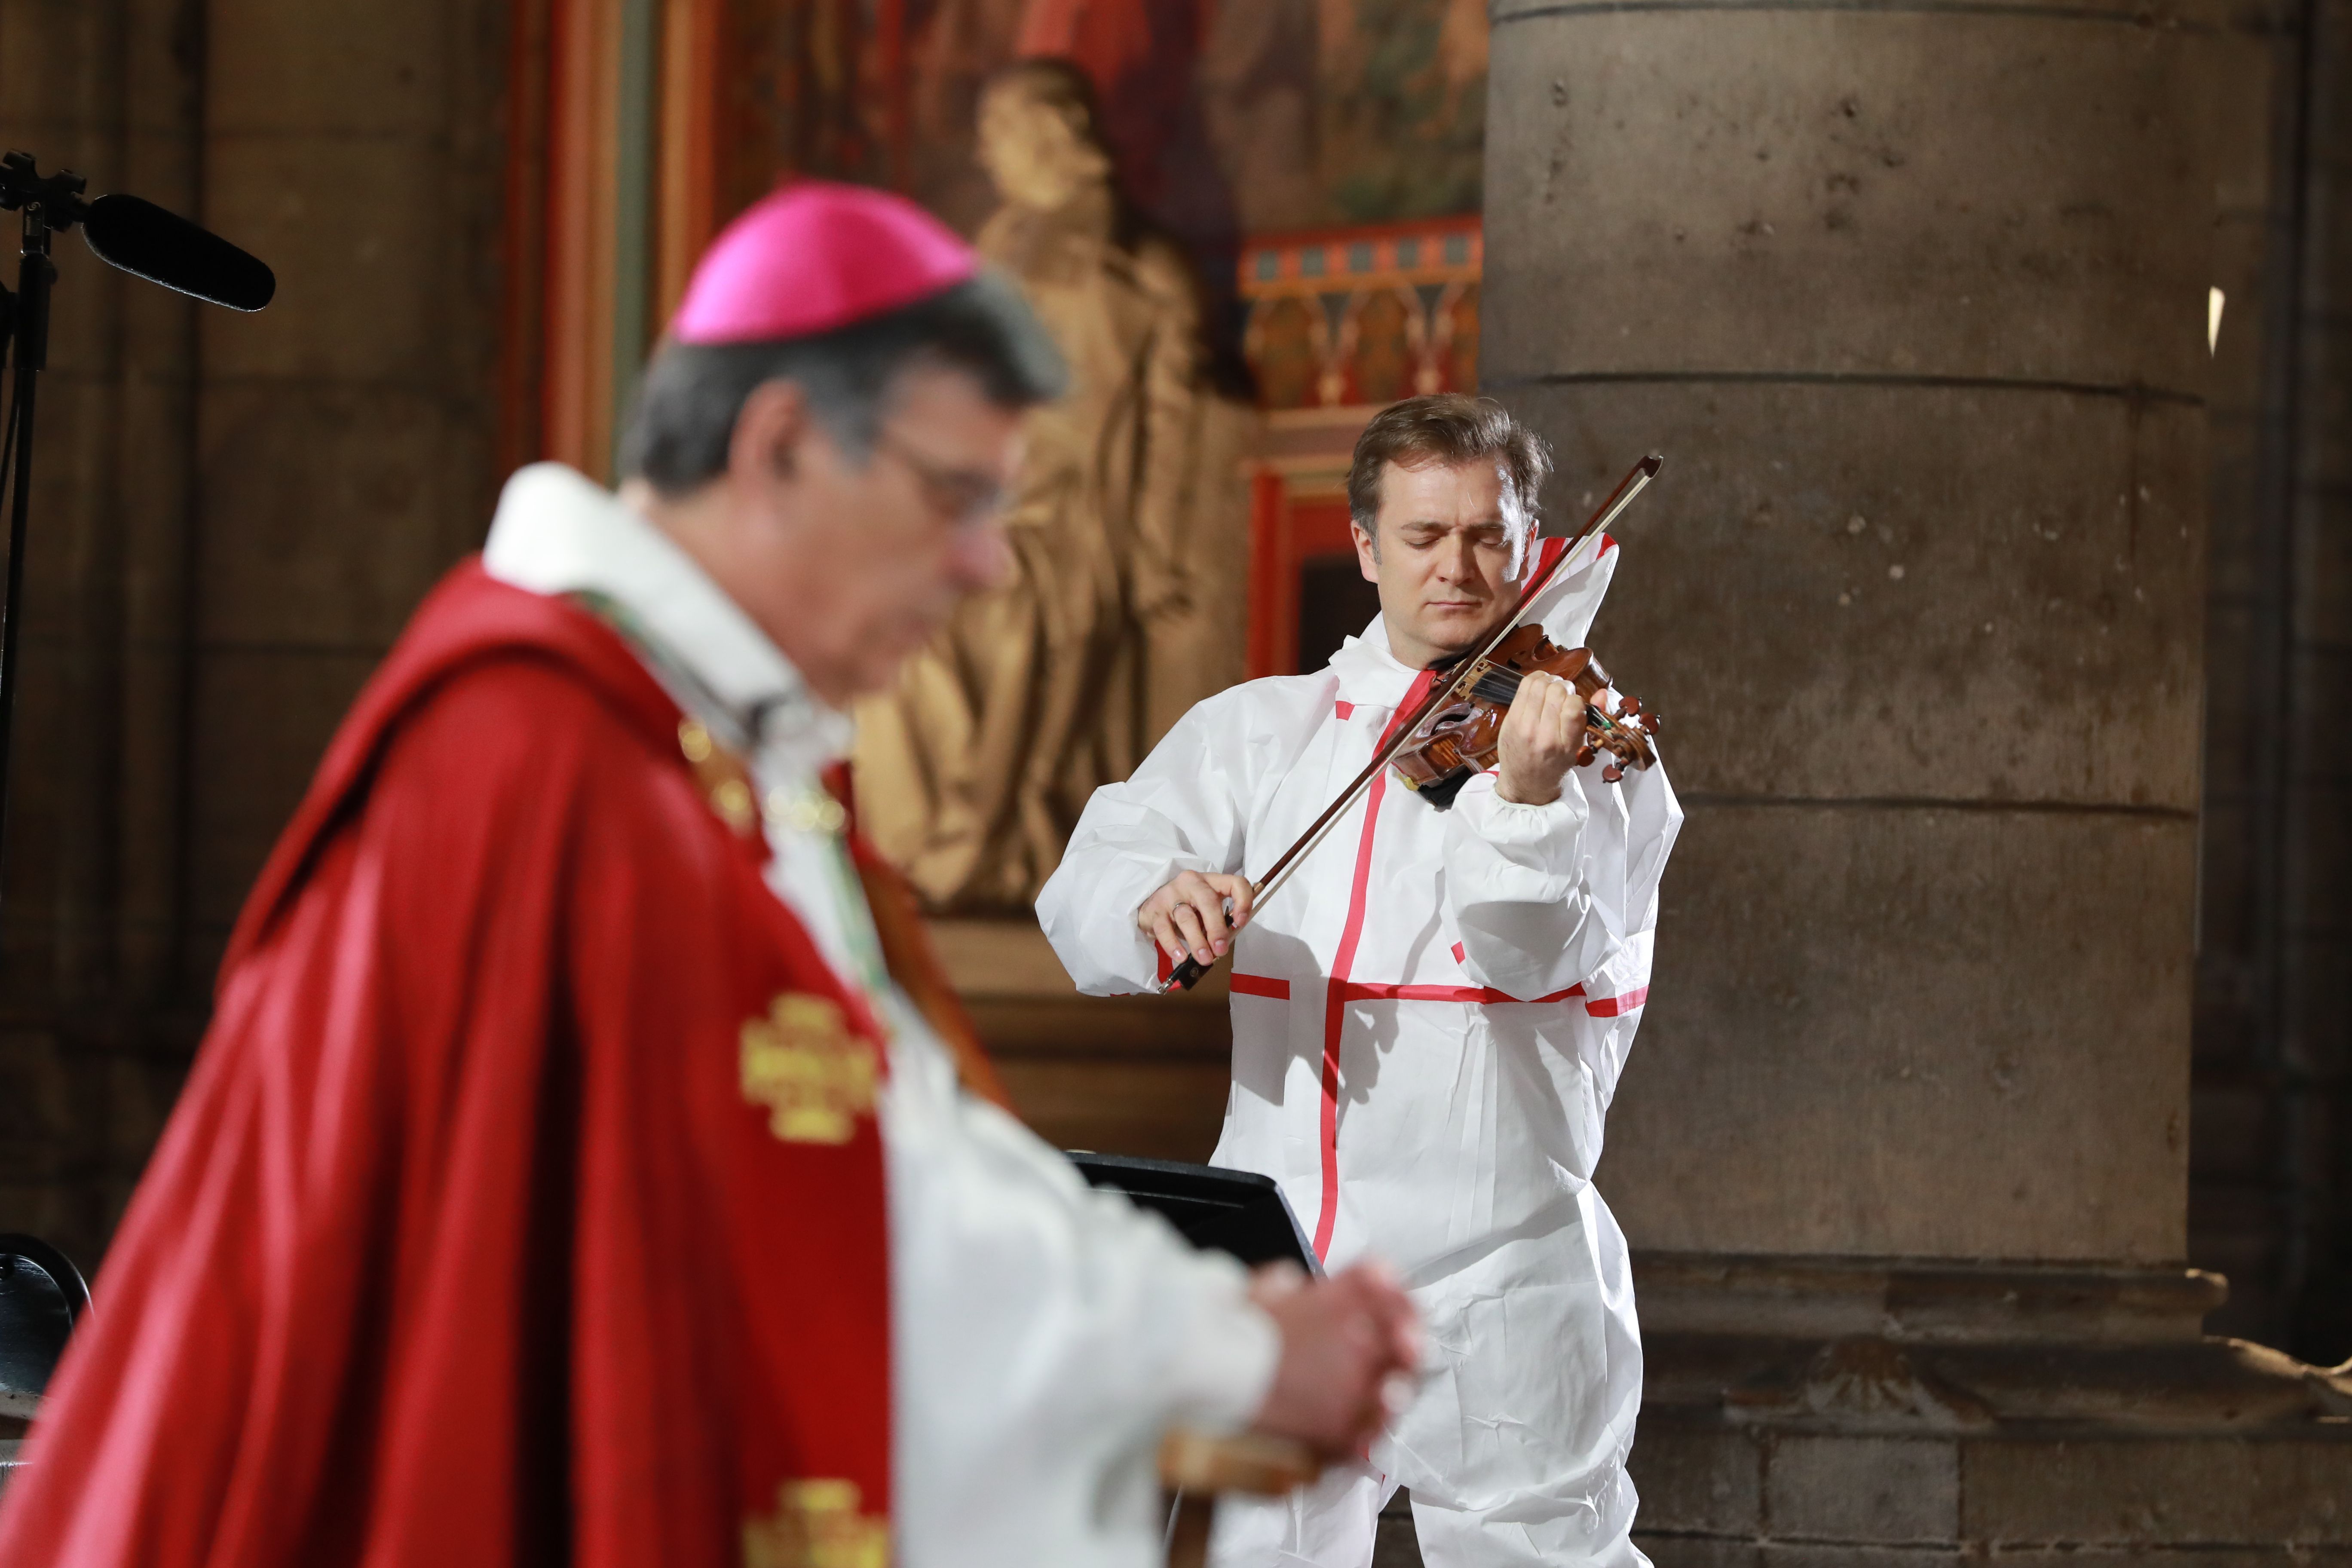 Archbishop of Paris Michel Aupetit attends a meditation ceremony to celebrate Good Friday as violonist Renaud Capucon plays